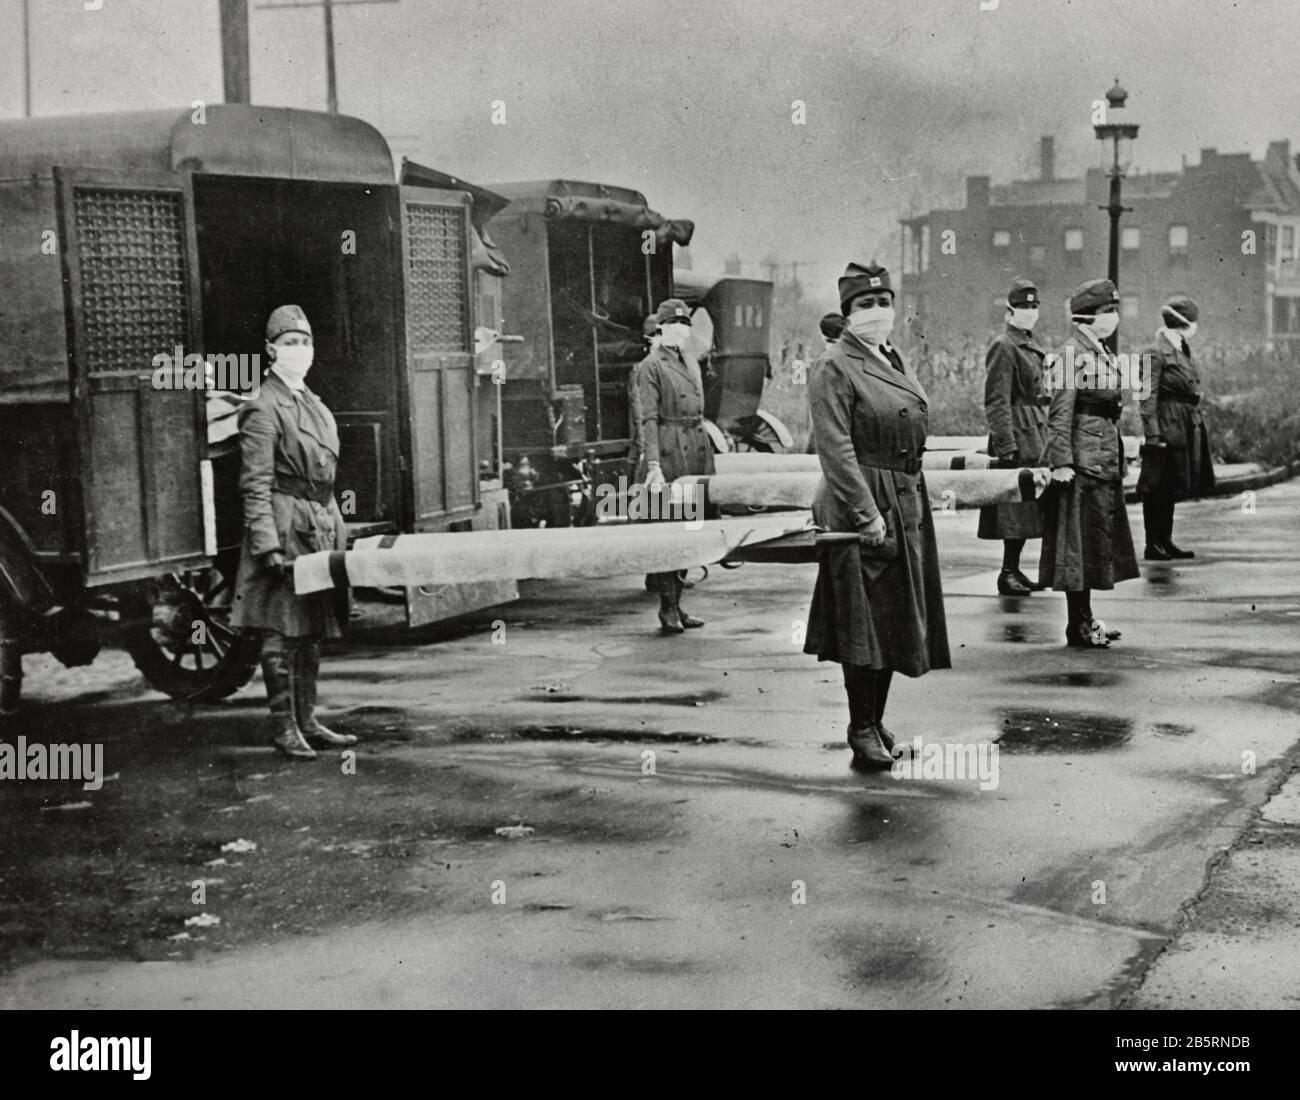 St. Louis Red Cross Motor Corps on duty Oct. 1918 Influenza epidemic. Photograph shows mask-wearing women holding stretchers at backs of ambulances. Stock Photo